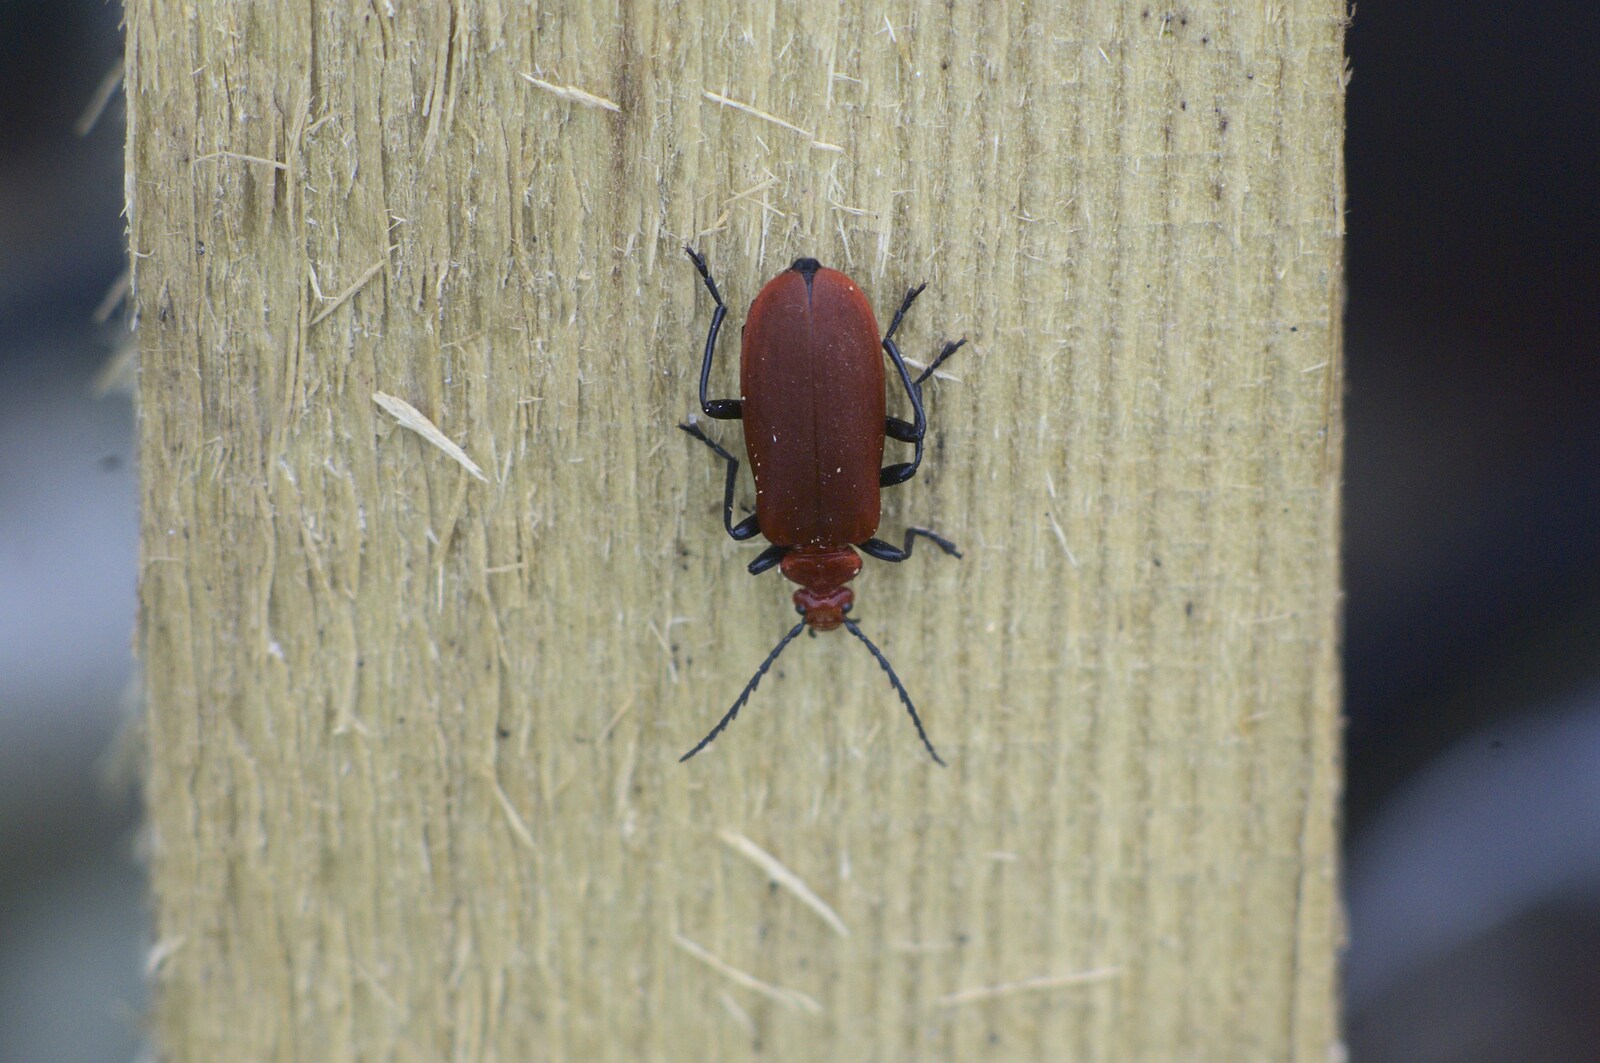 A red beetle with black legs, on a piece of wood from Martina's Birthday Barbeque, Thrandeston, Suffolk - 23rd May 2009